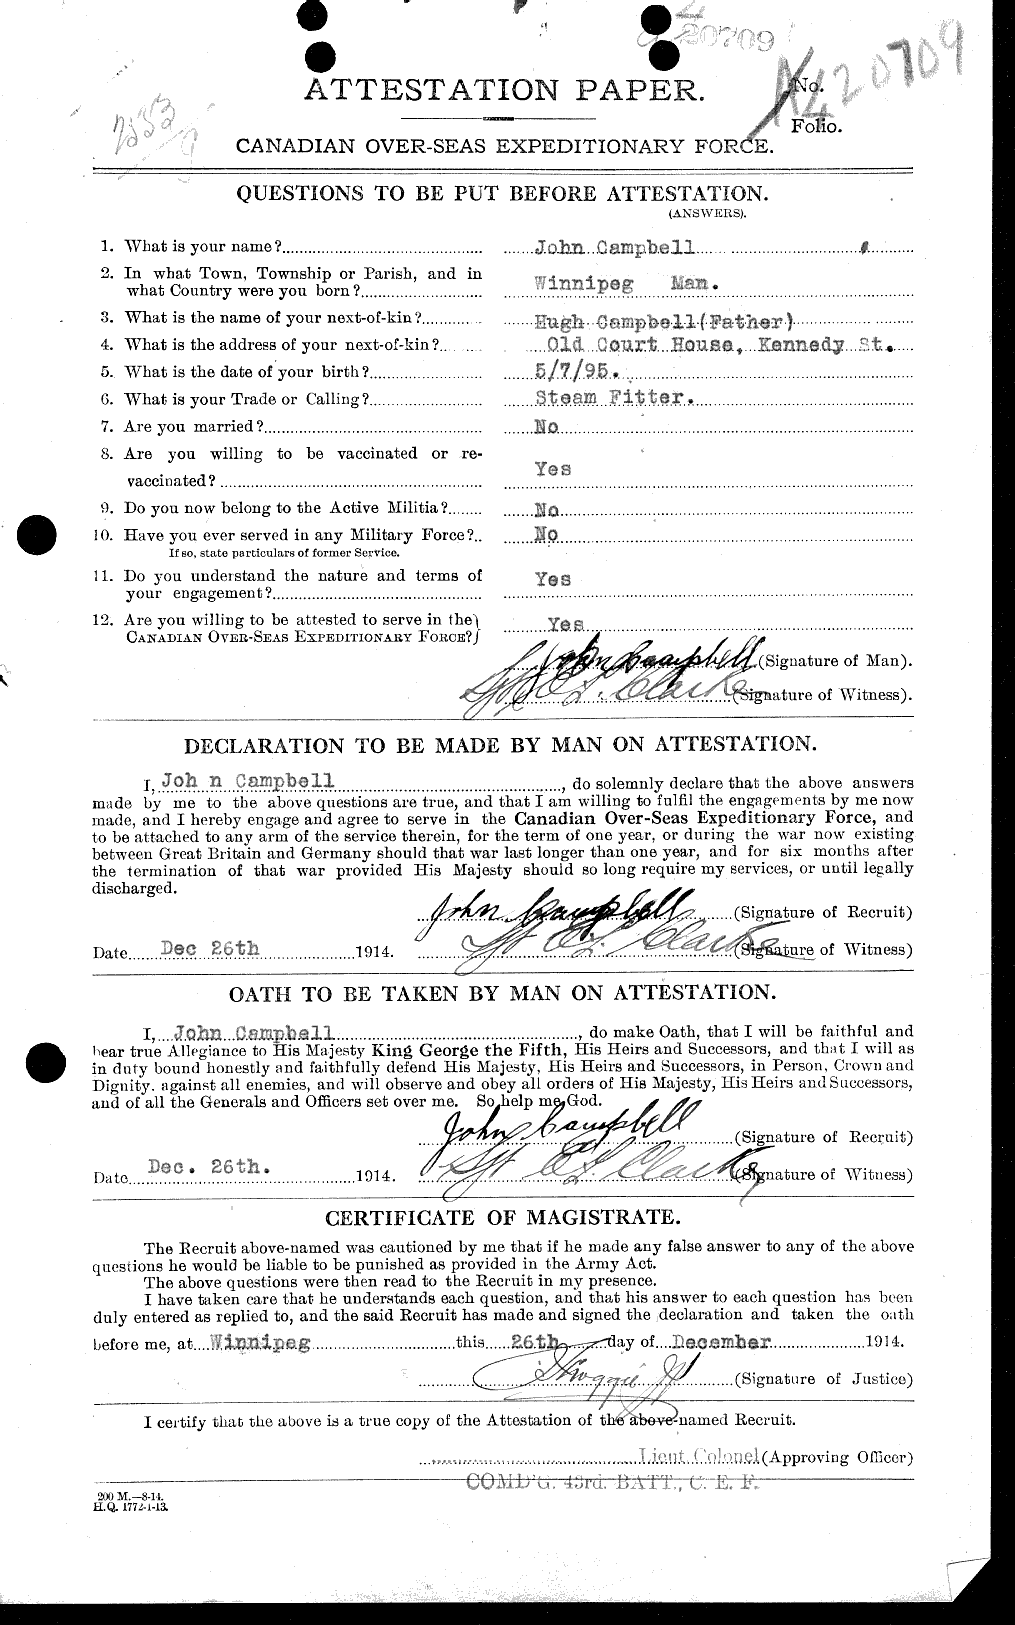 Personnel Records of the First World War - CEF 006828a